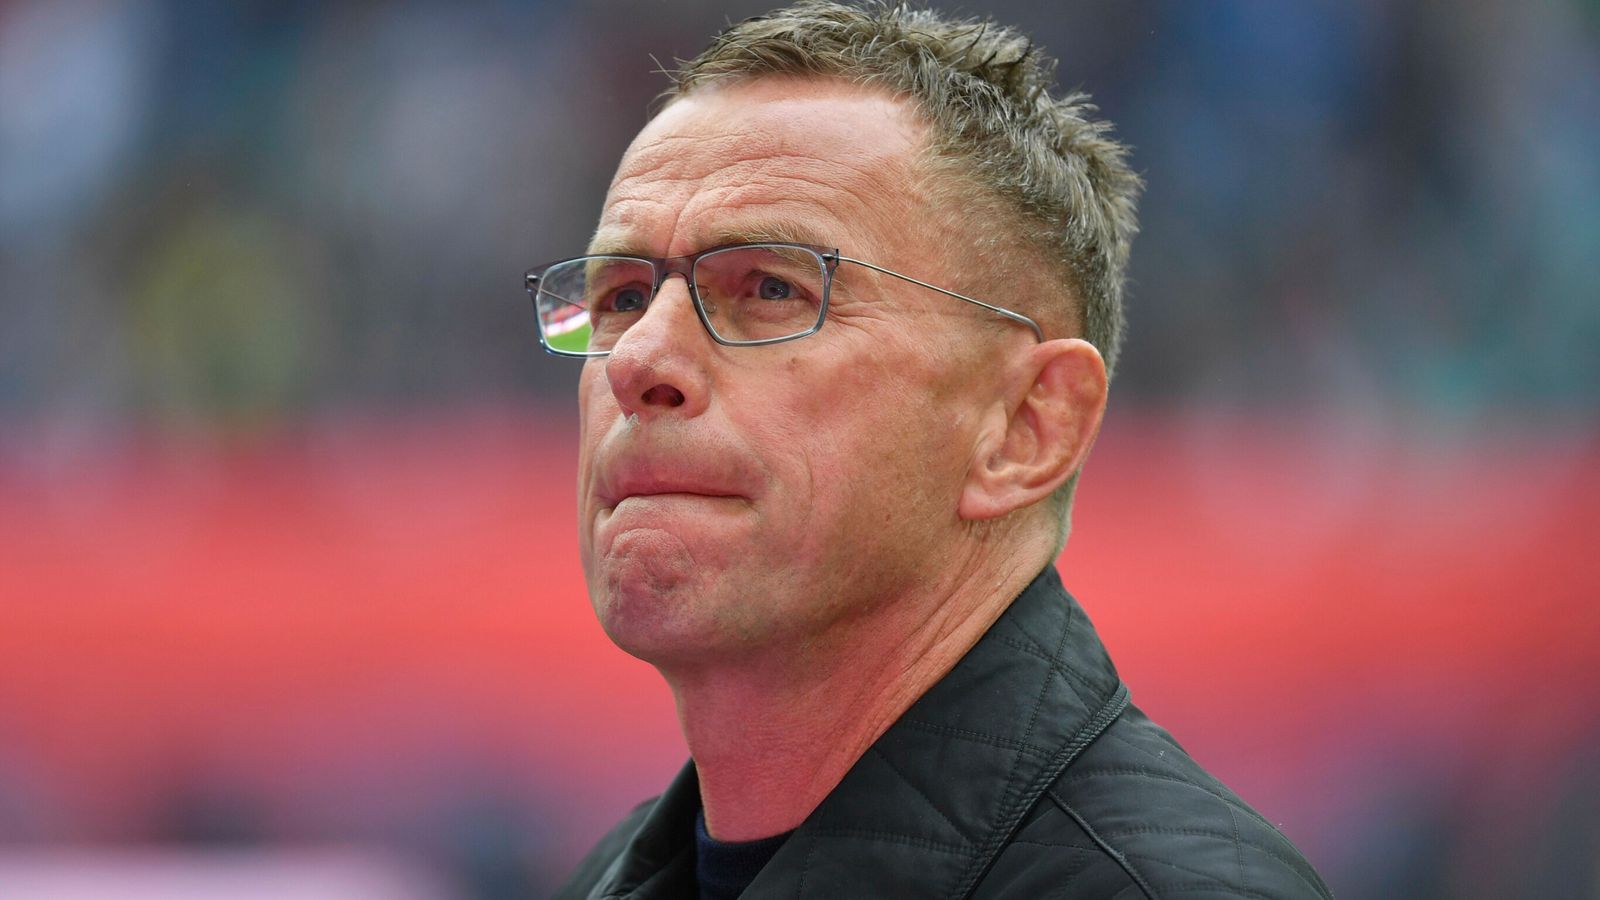 Rangnick to begin Man Utd role after work permit granted